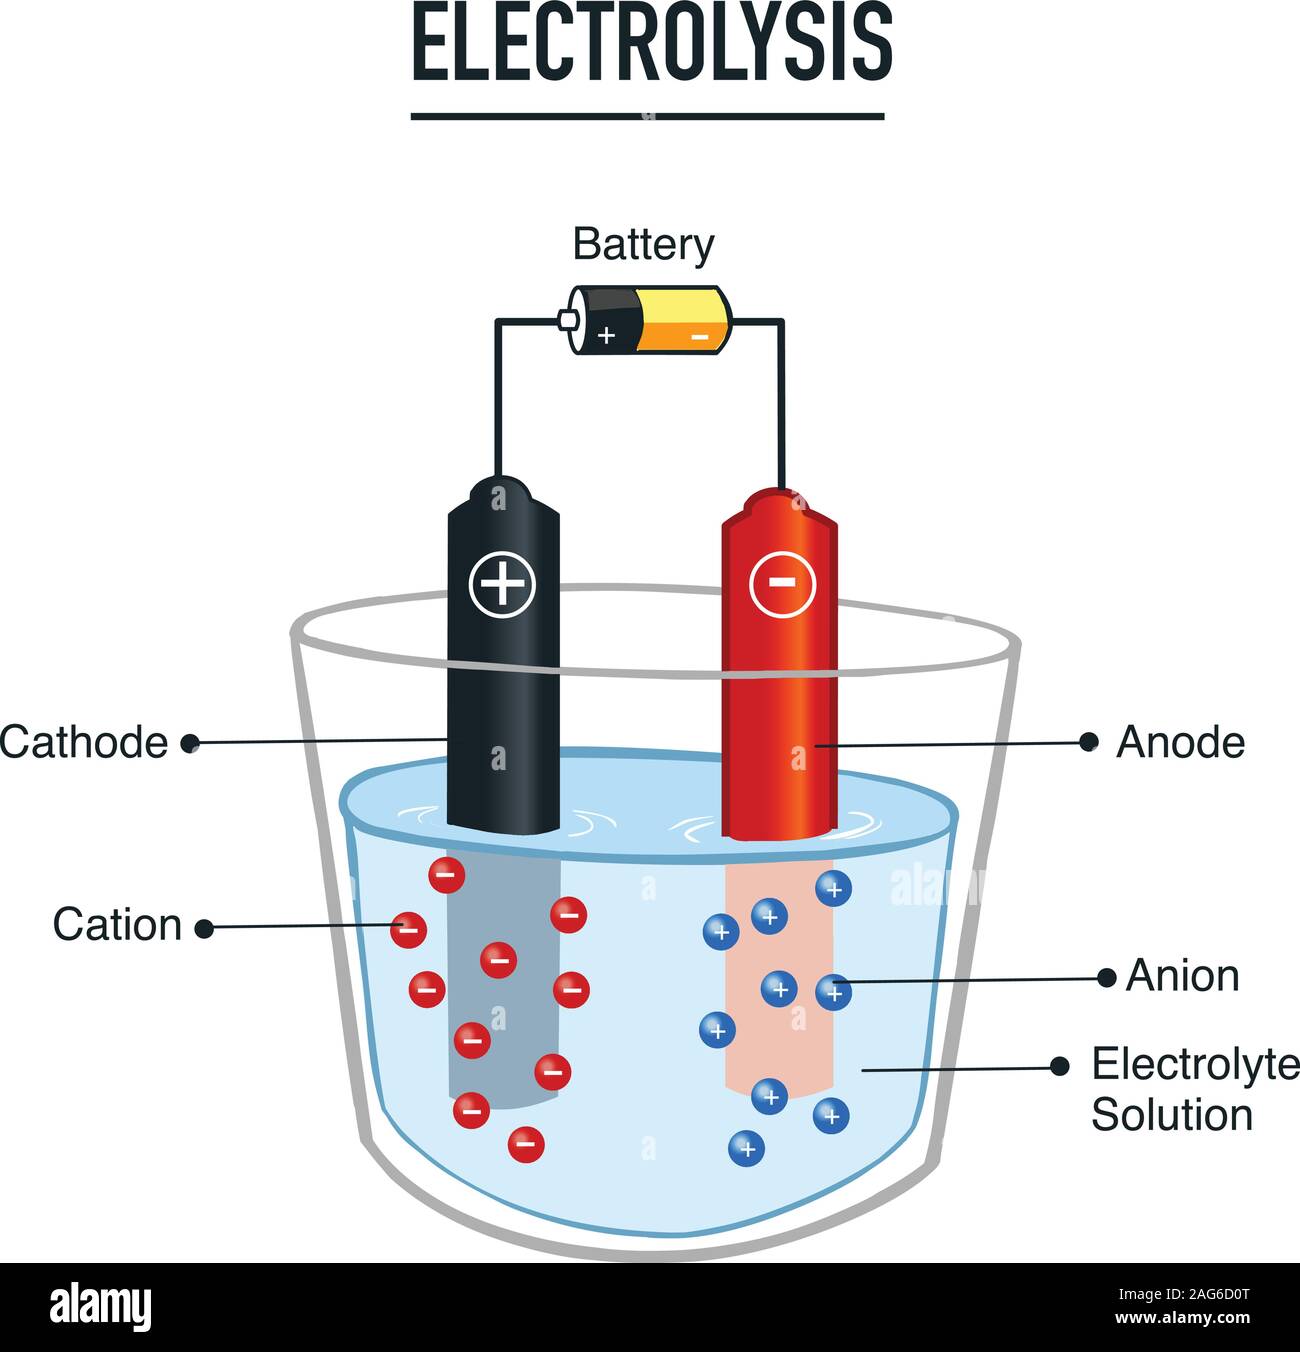 Electrolysis process useful for education in schools vector ...